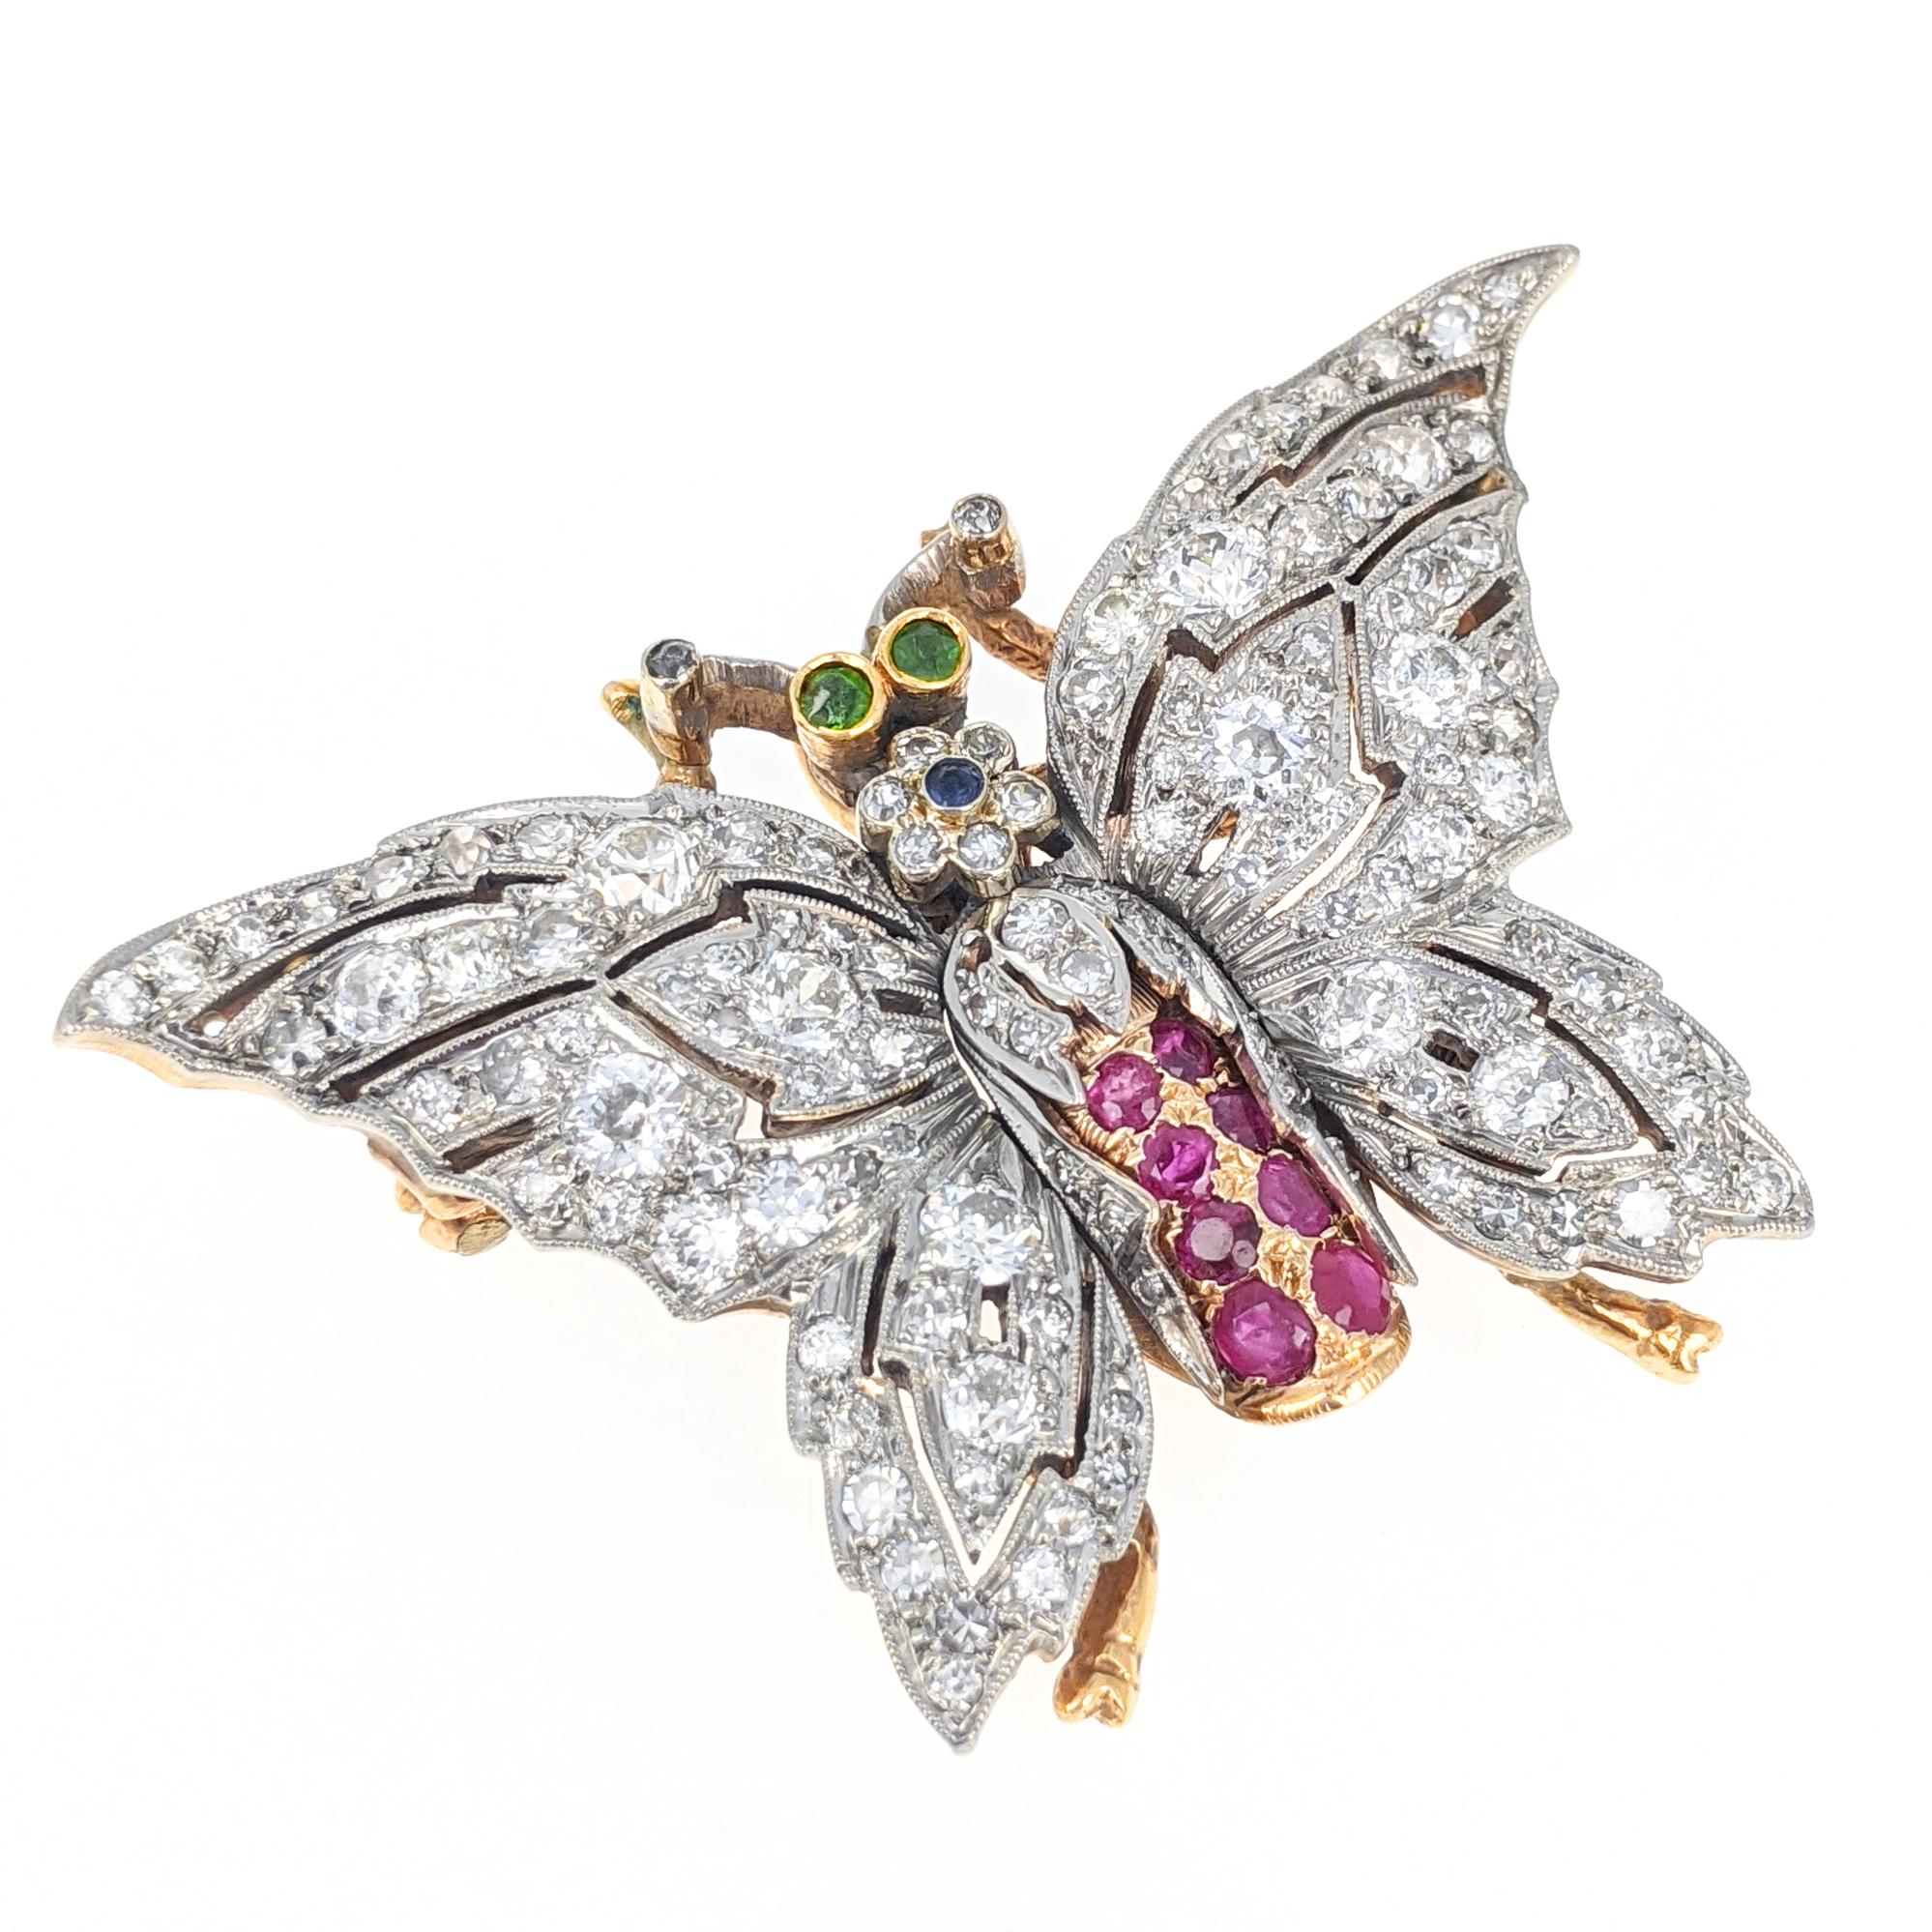 This antique butterfly brooch features 121 Old-European and single-cut diamonds with a total approximate weight of 4.5 carats. The body is further set with eight rubies, one blue stone and the eyes are set with two green stones. It is expertly